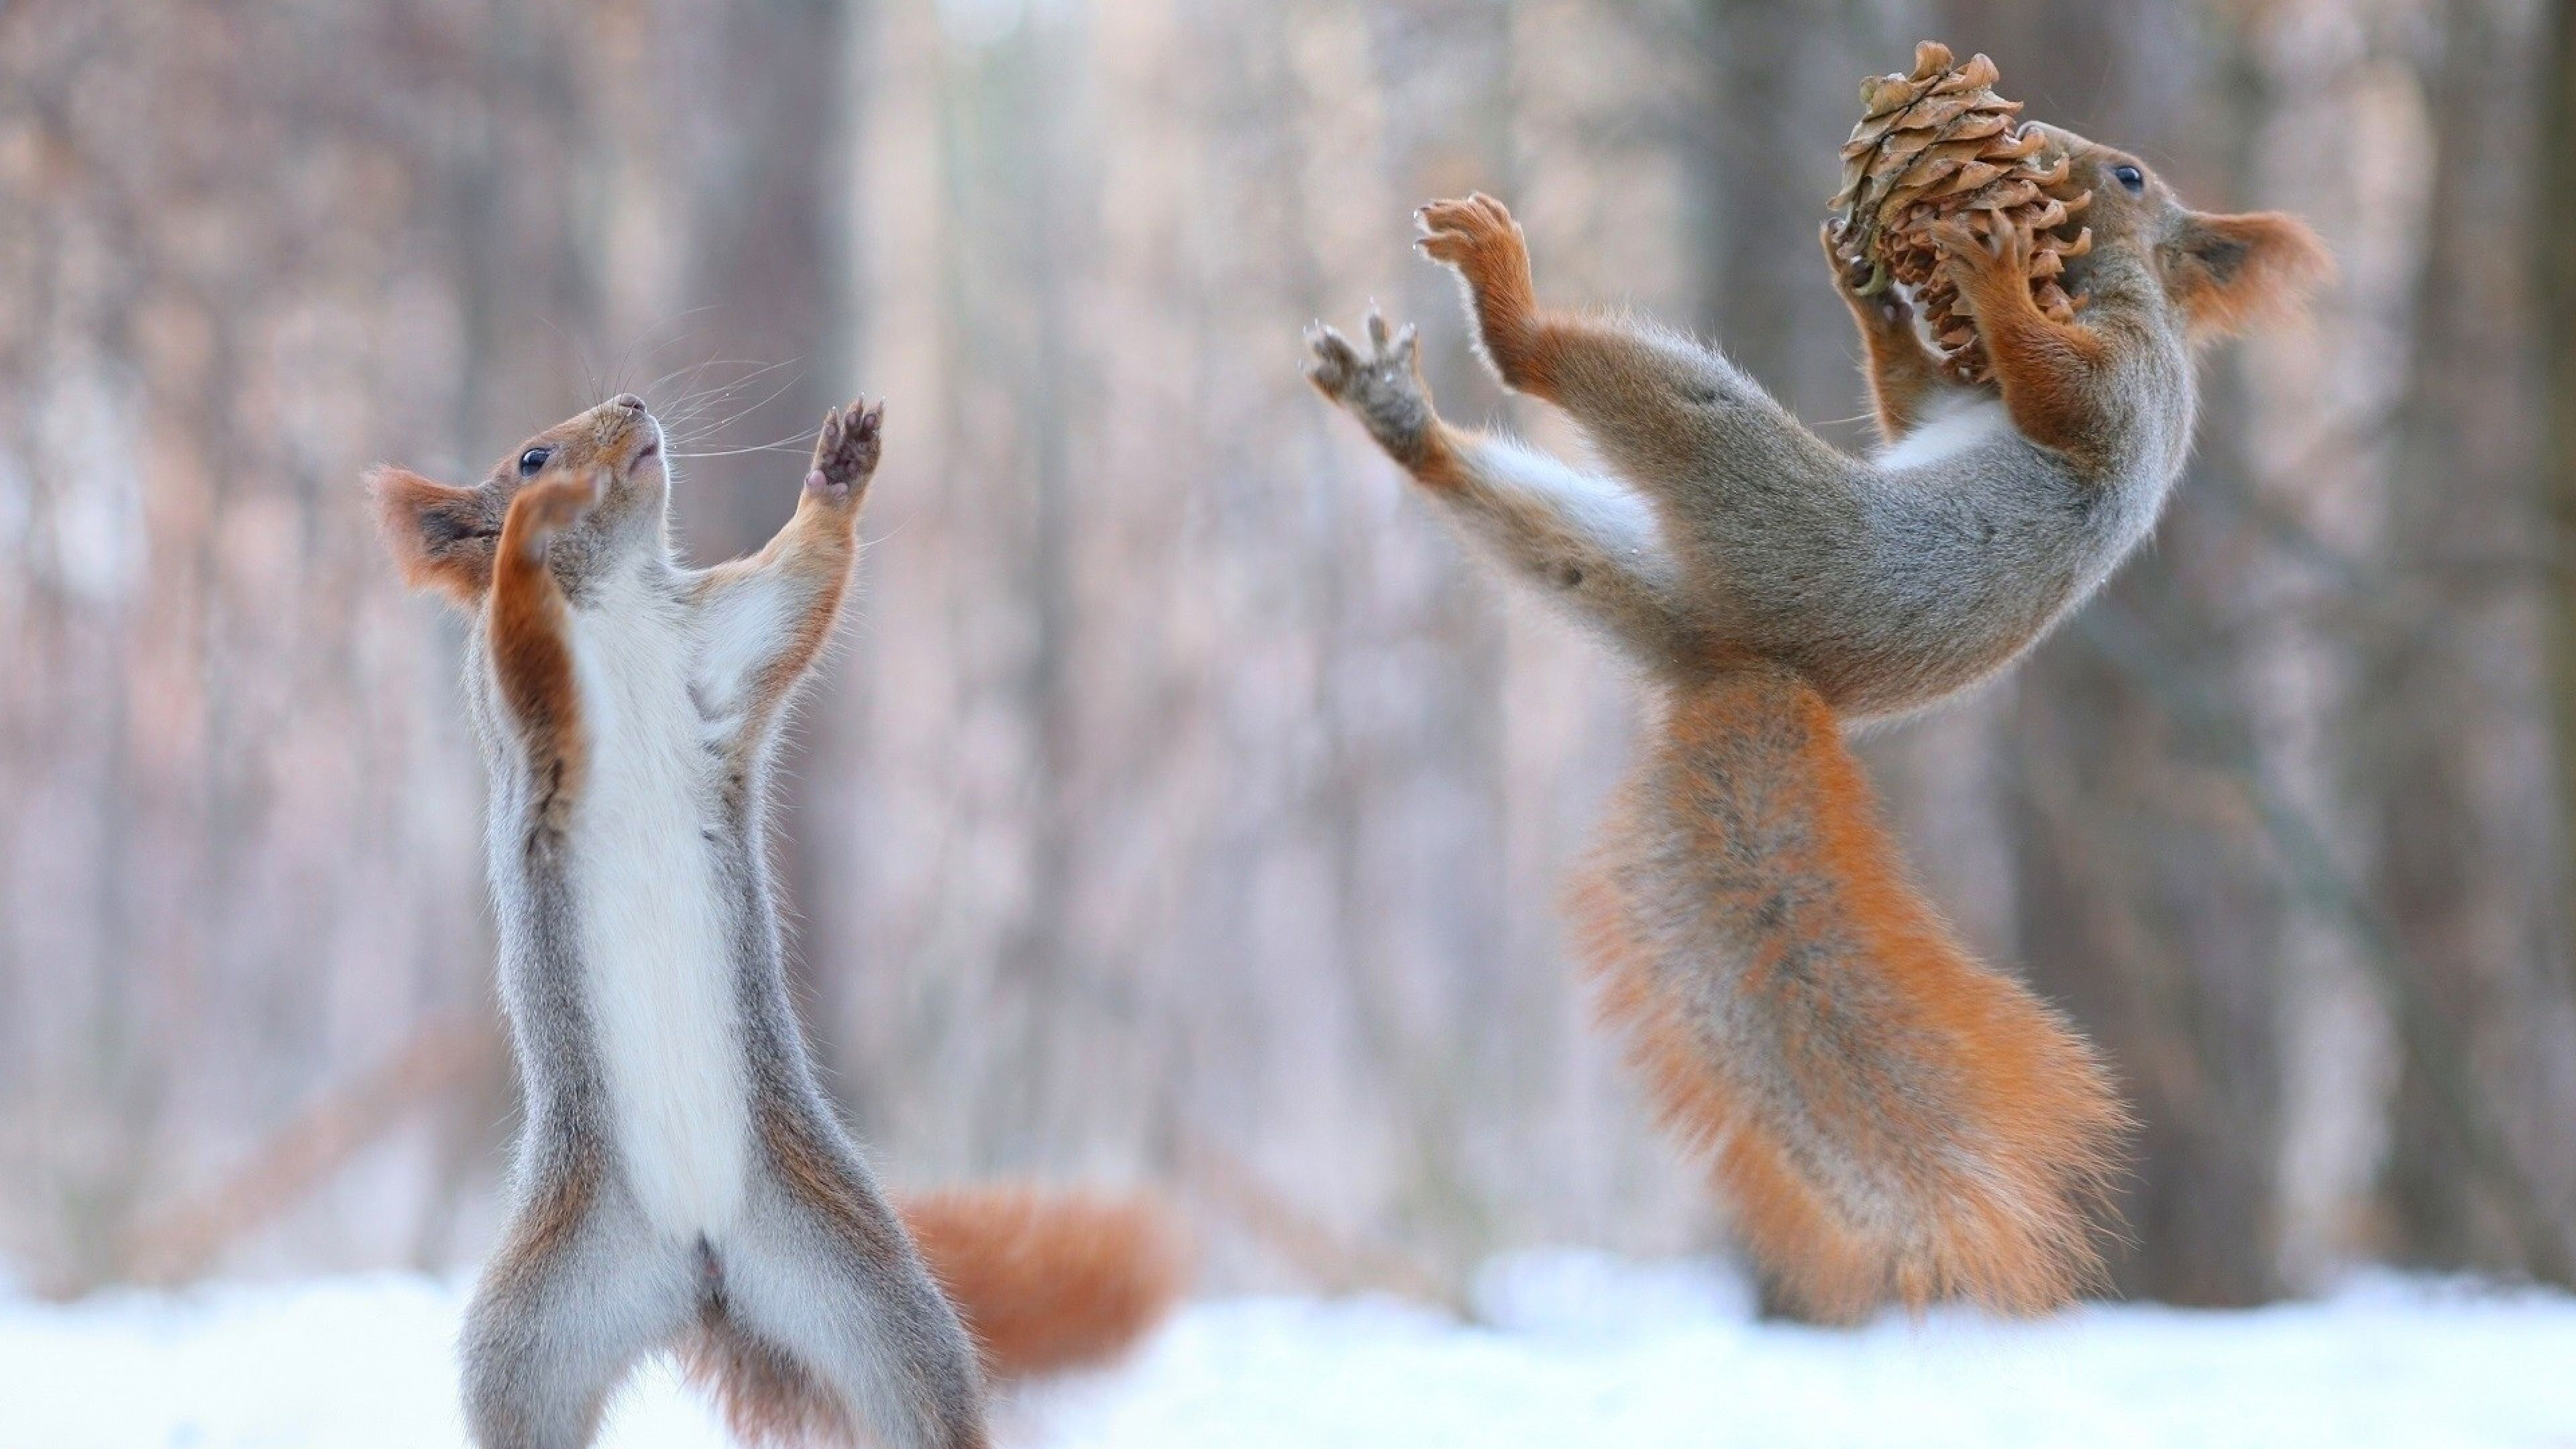 3840x2160 Squirrels Having Fun In Snow 1280x1024 Resolution Hd 4k Wallpaper Image Background Photo And Picture